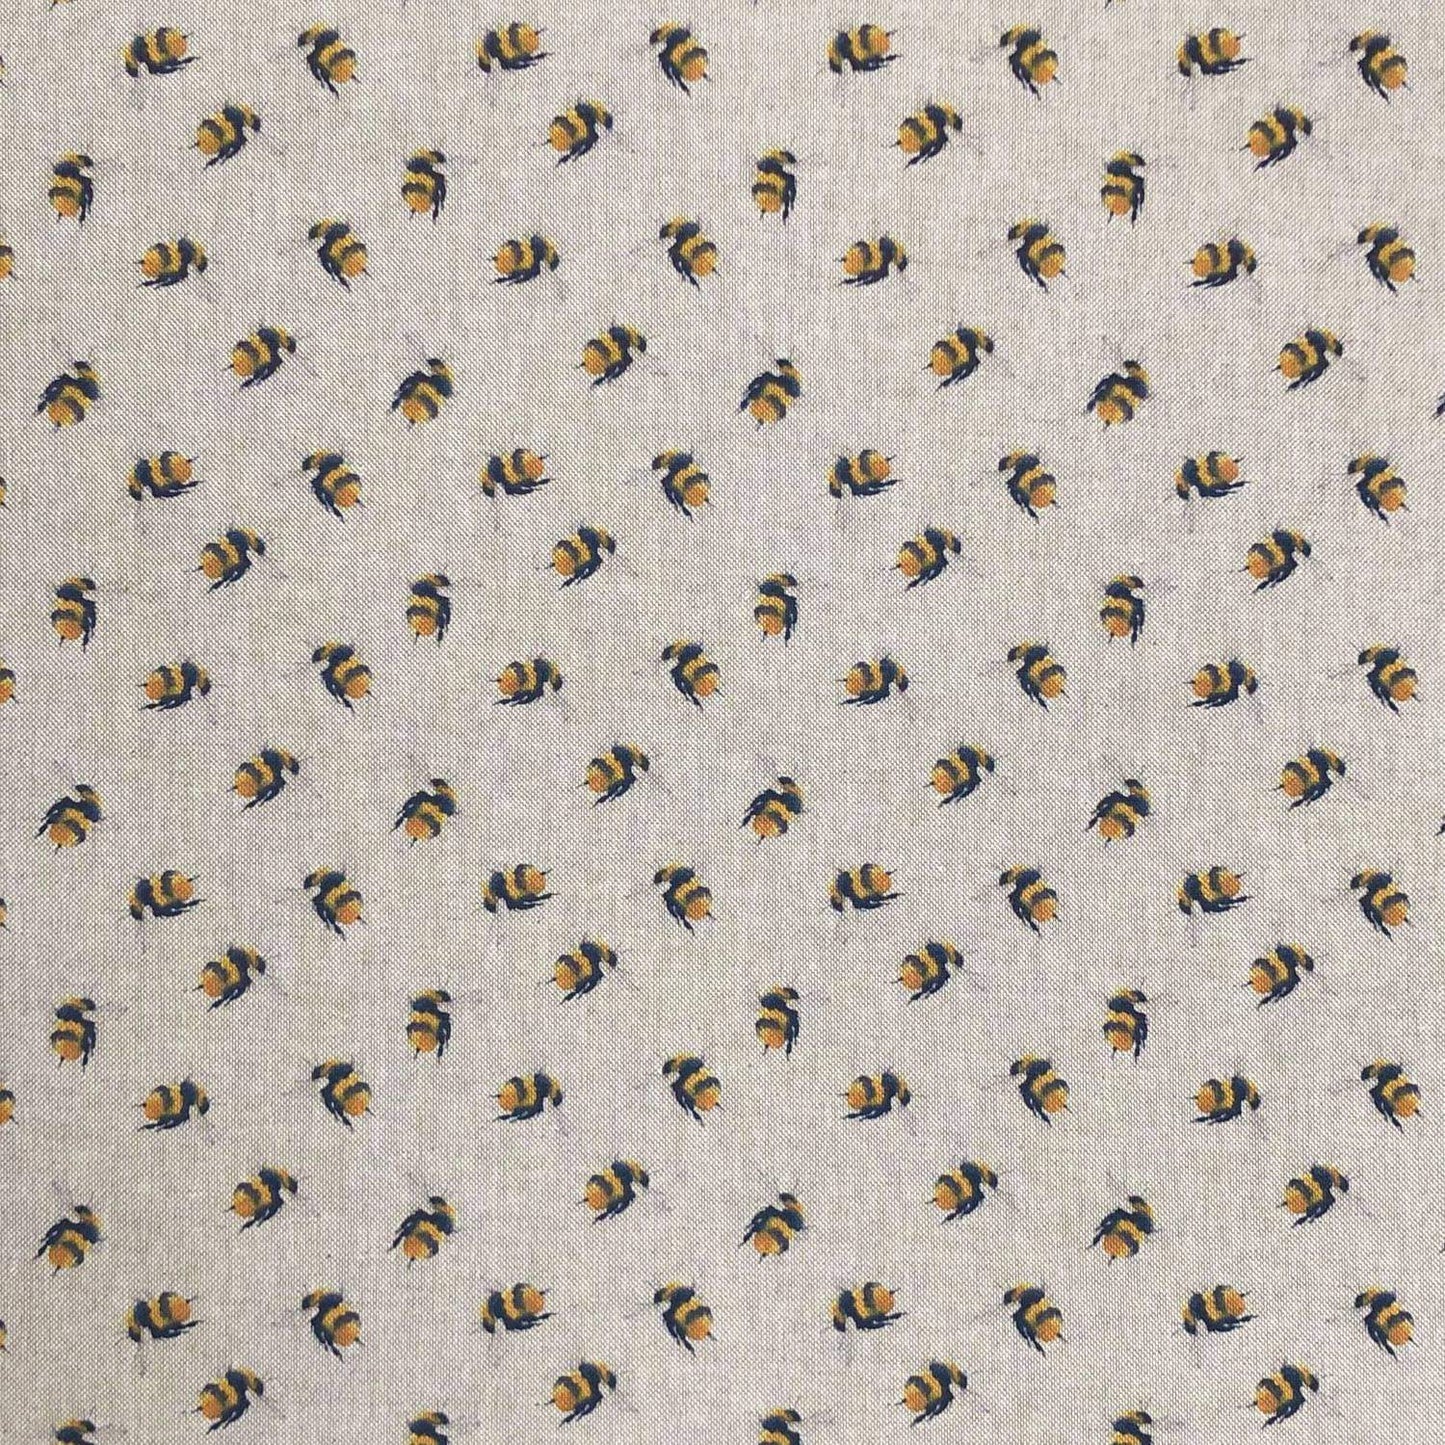 Watercolour bee fabric with bumblebees on a linen fabric - perfect for crafting